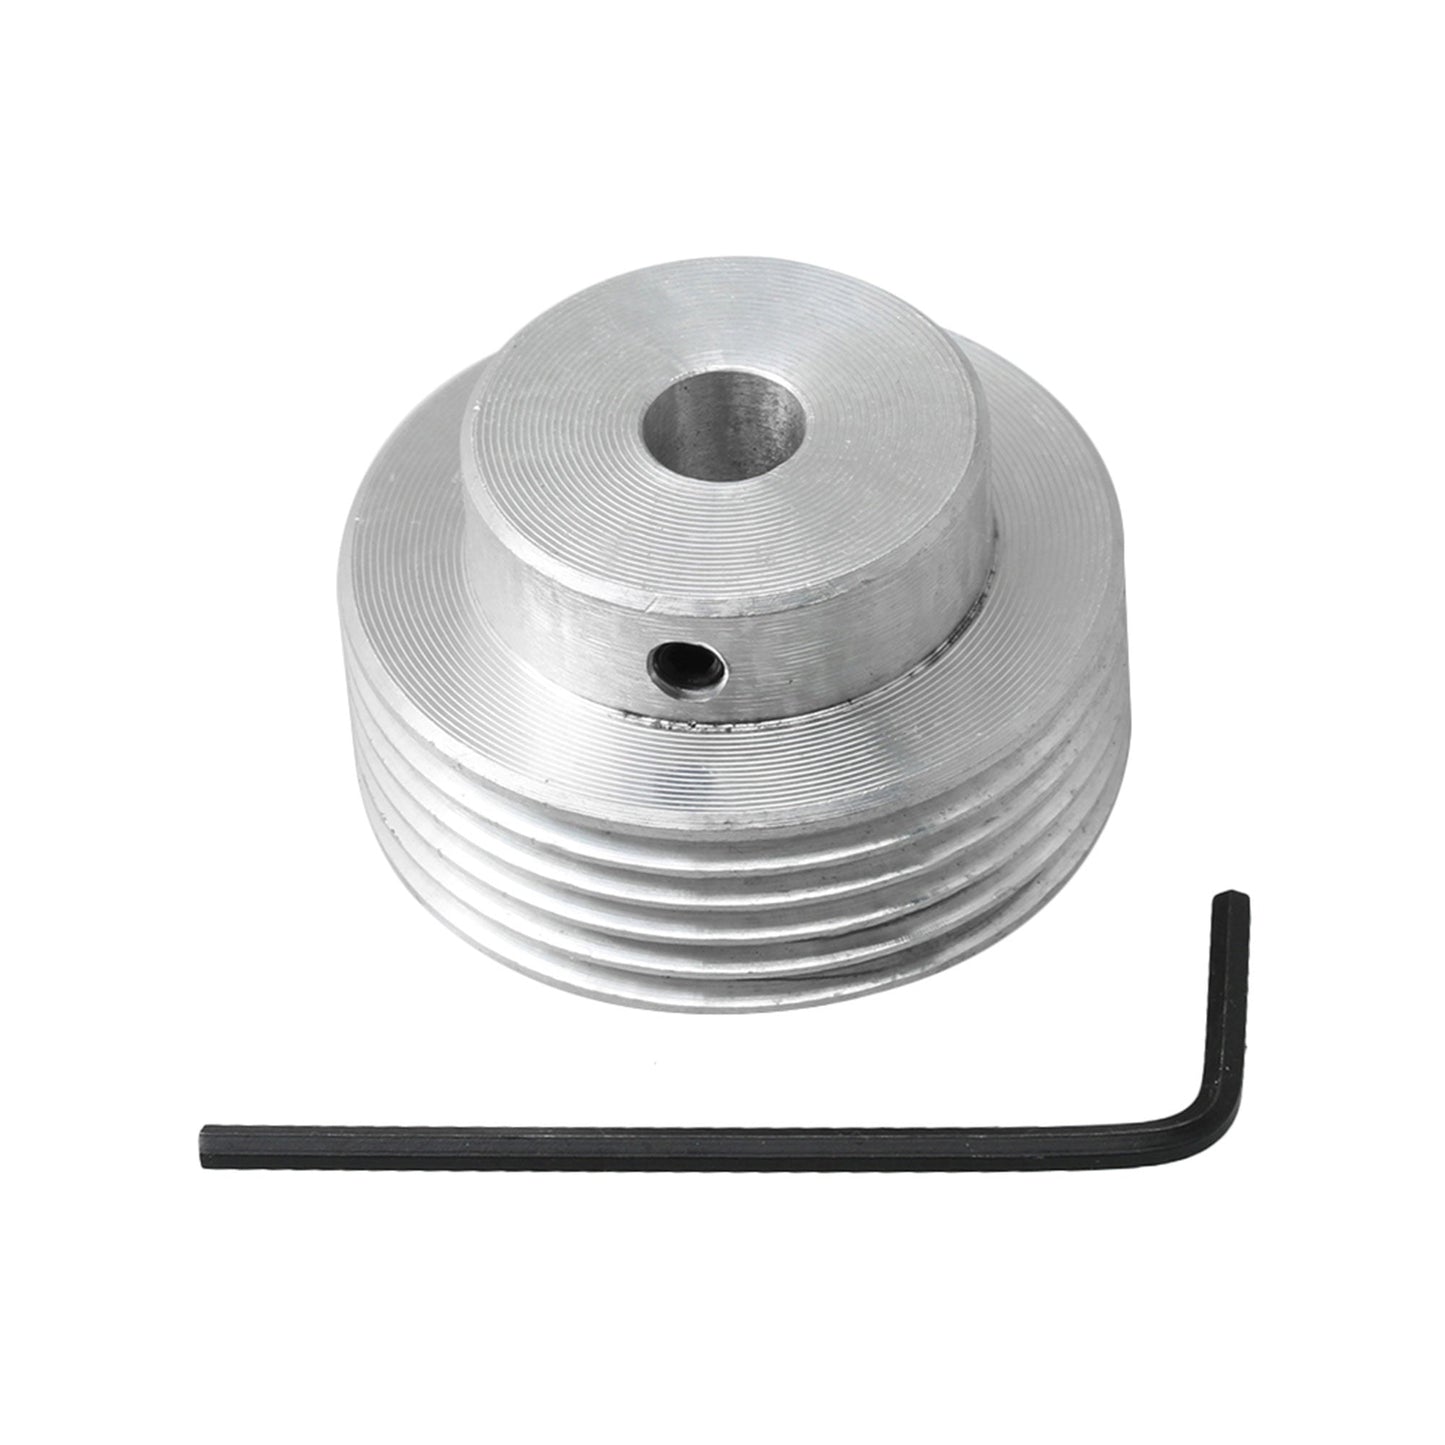 BQLZR 40mm Diameter 8mm Bore Silver Machine Power Tool Accessories Multi Wedge Belt Pulley Fitting for V-Belt